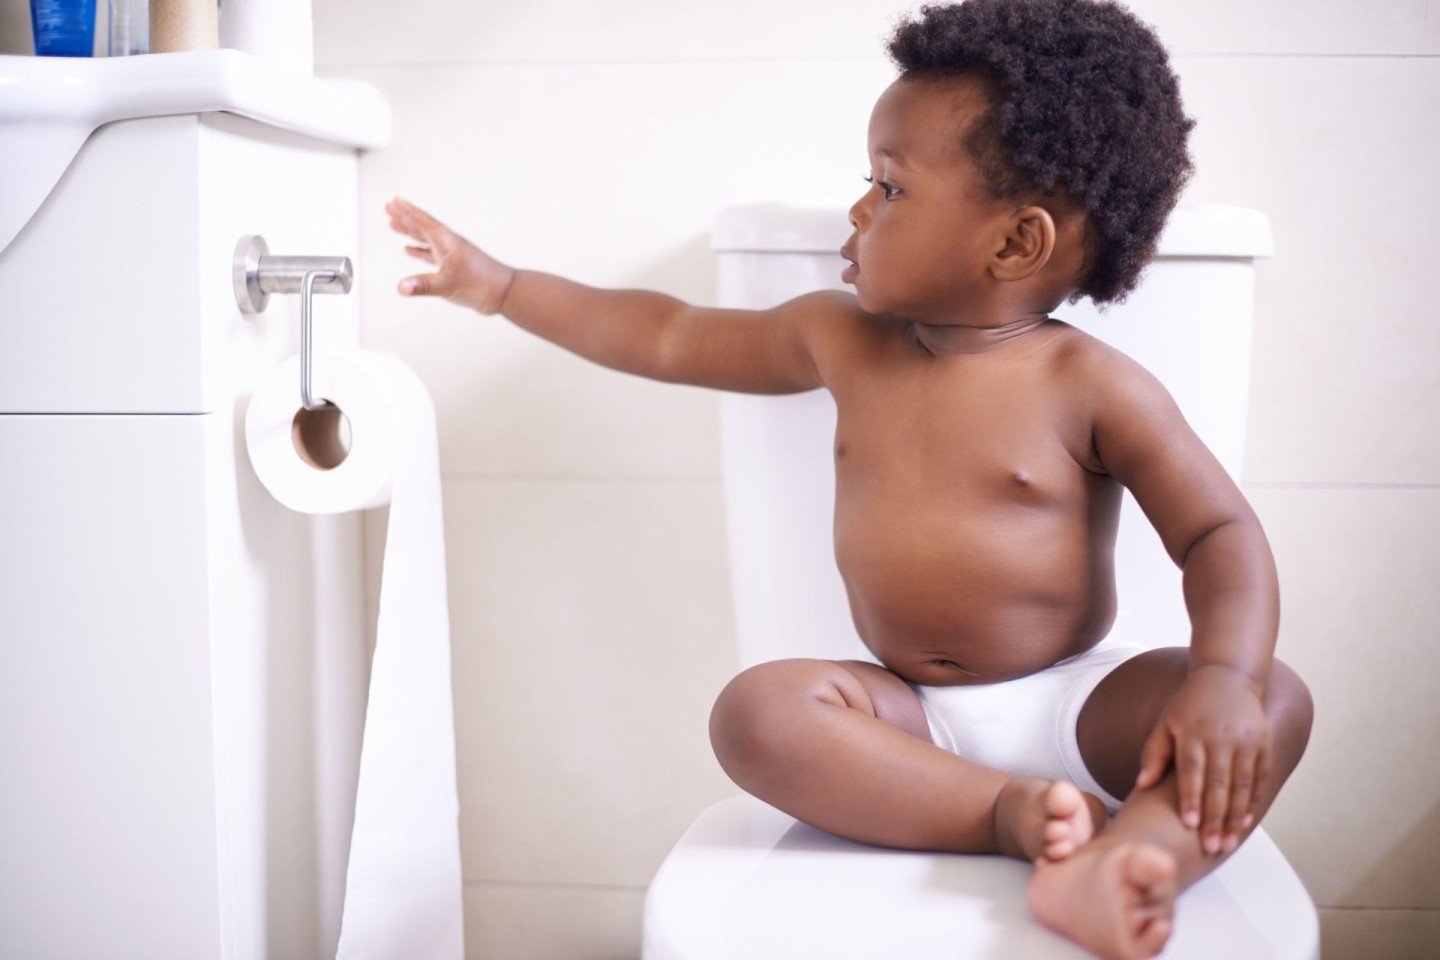 Toddler boy sitting on toilet and reaching for toilet paper